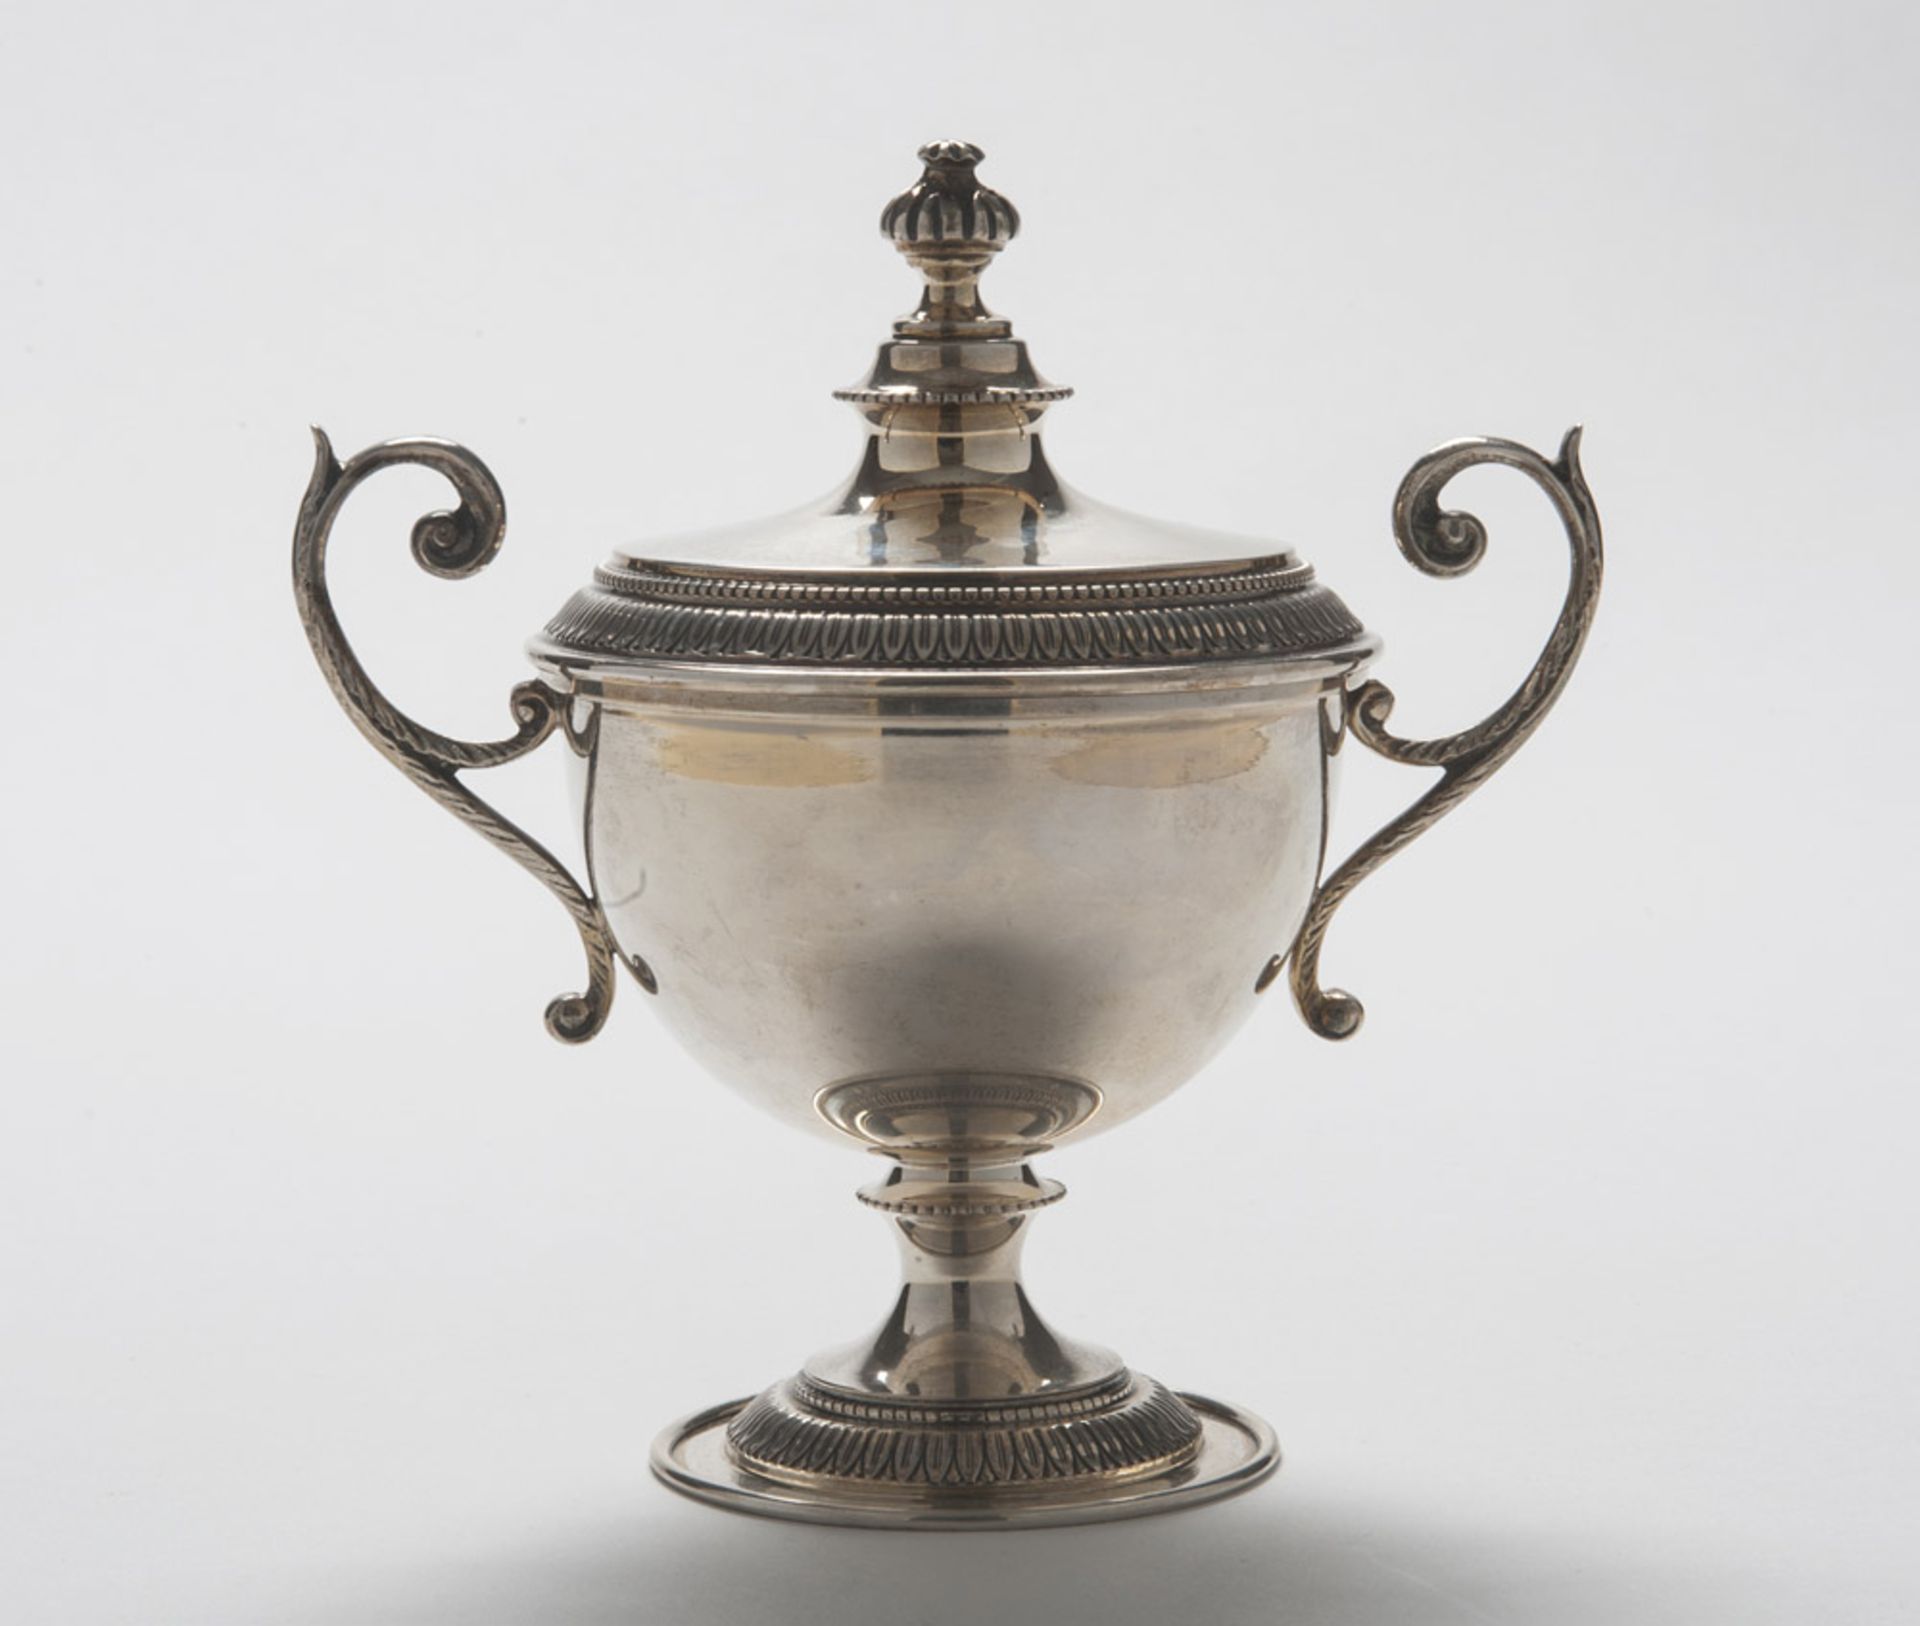 SILVER SUGAR BOWL, 20TH CENTURY with inside gilded and you hem godronati. Measures cm. 17 x 11 x 17,